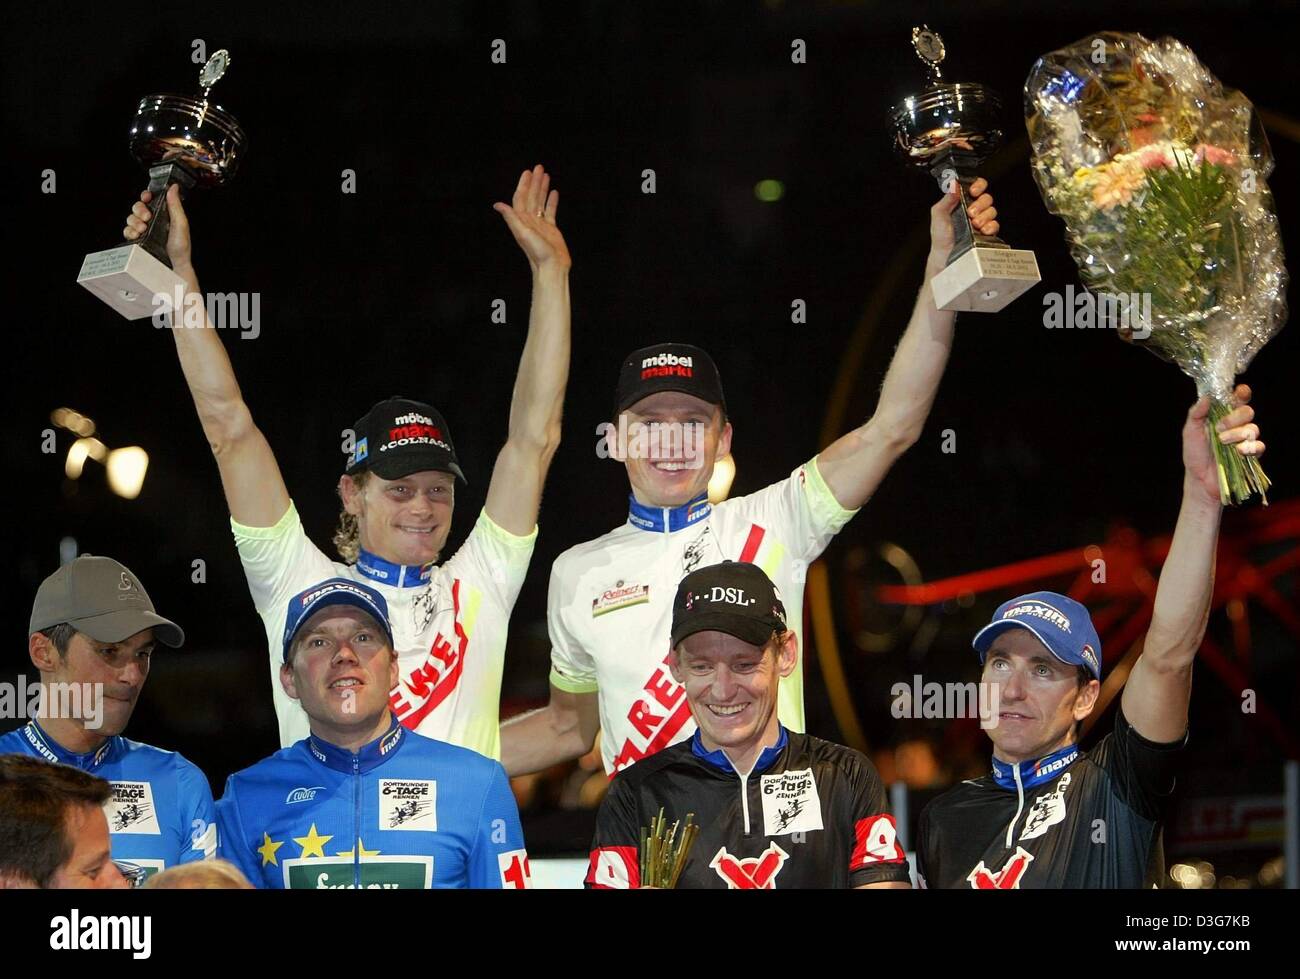 (dpa) - The Swiss team of Bruno Risi (top, L) and Kurt Betschart (top, R) are all smiles after winning the six days race in Dortmund, Germany, 5 November 2003. The title defenders, Germany's Andreas Kappes (L, below) and Andreas Beikirch (2nd from L, below) win second place, and the team of German Rolf Aldag (2nd from R, below) and Australian Scott McGrory (R, below) finish third. Stock Photo